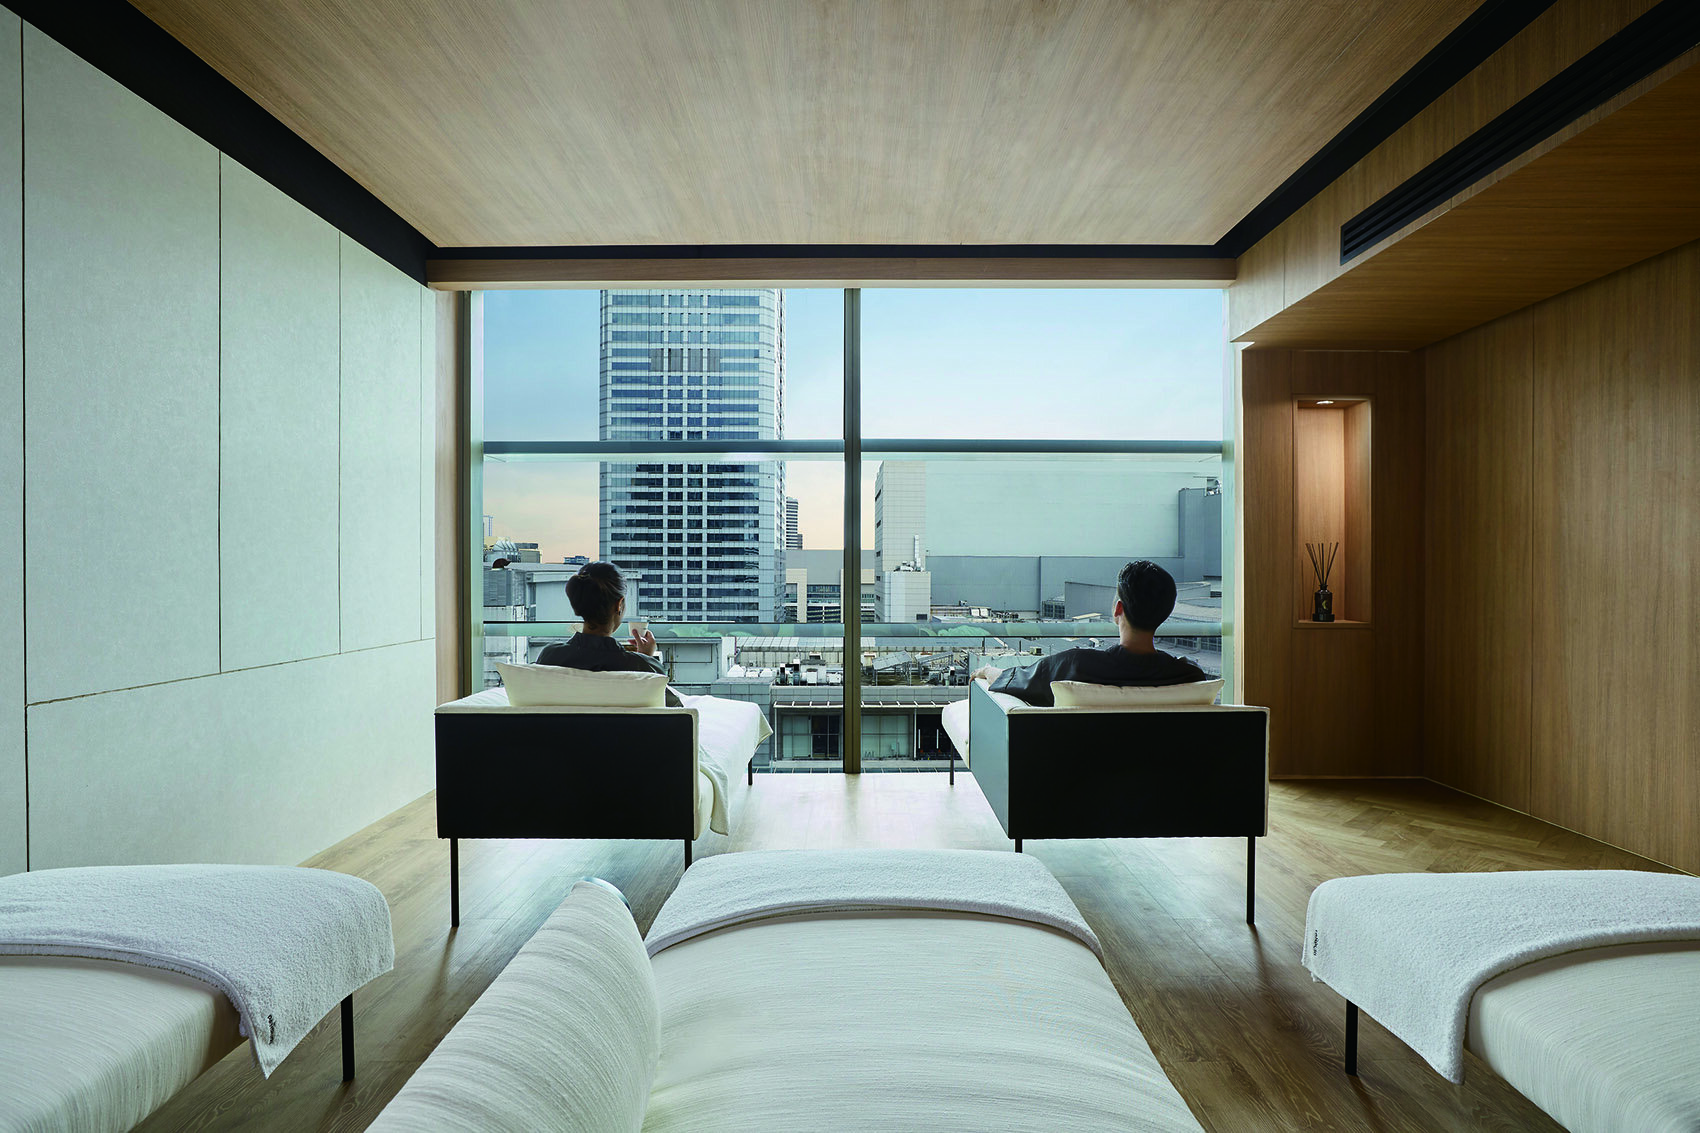 The guest room design of panpuri Hot Spring Club in Bangkok